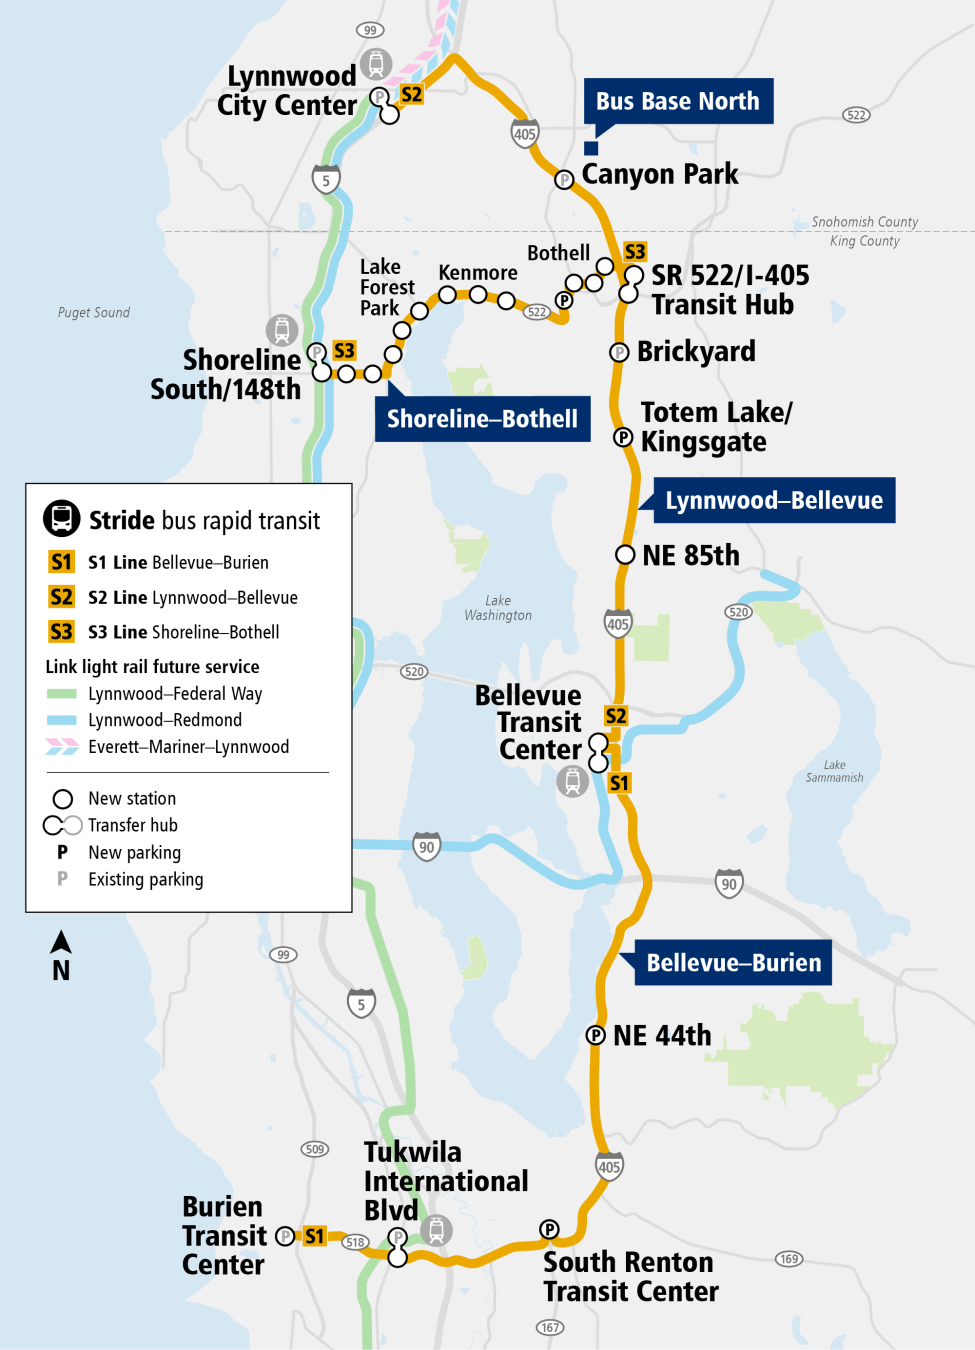 A map shows the S1 line from Burien to Bellevue, S2 line from Bellevue to Lynnwood and S3 line from Shoreline to Bothell.